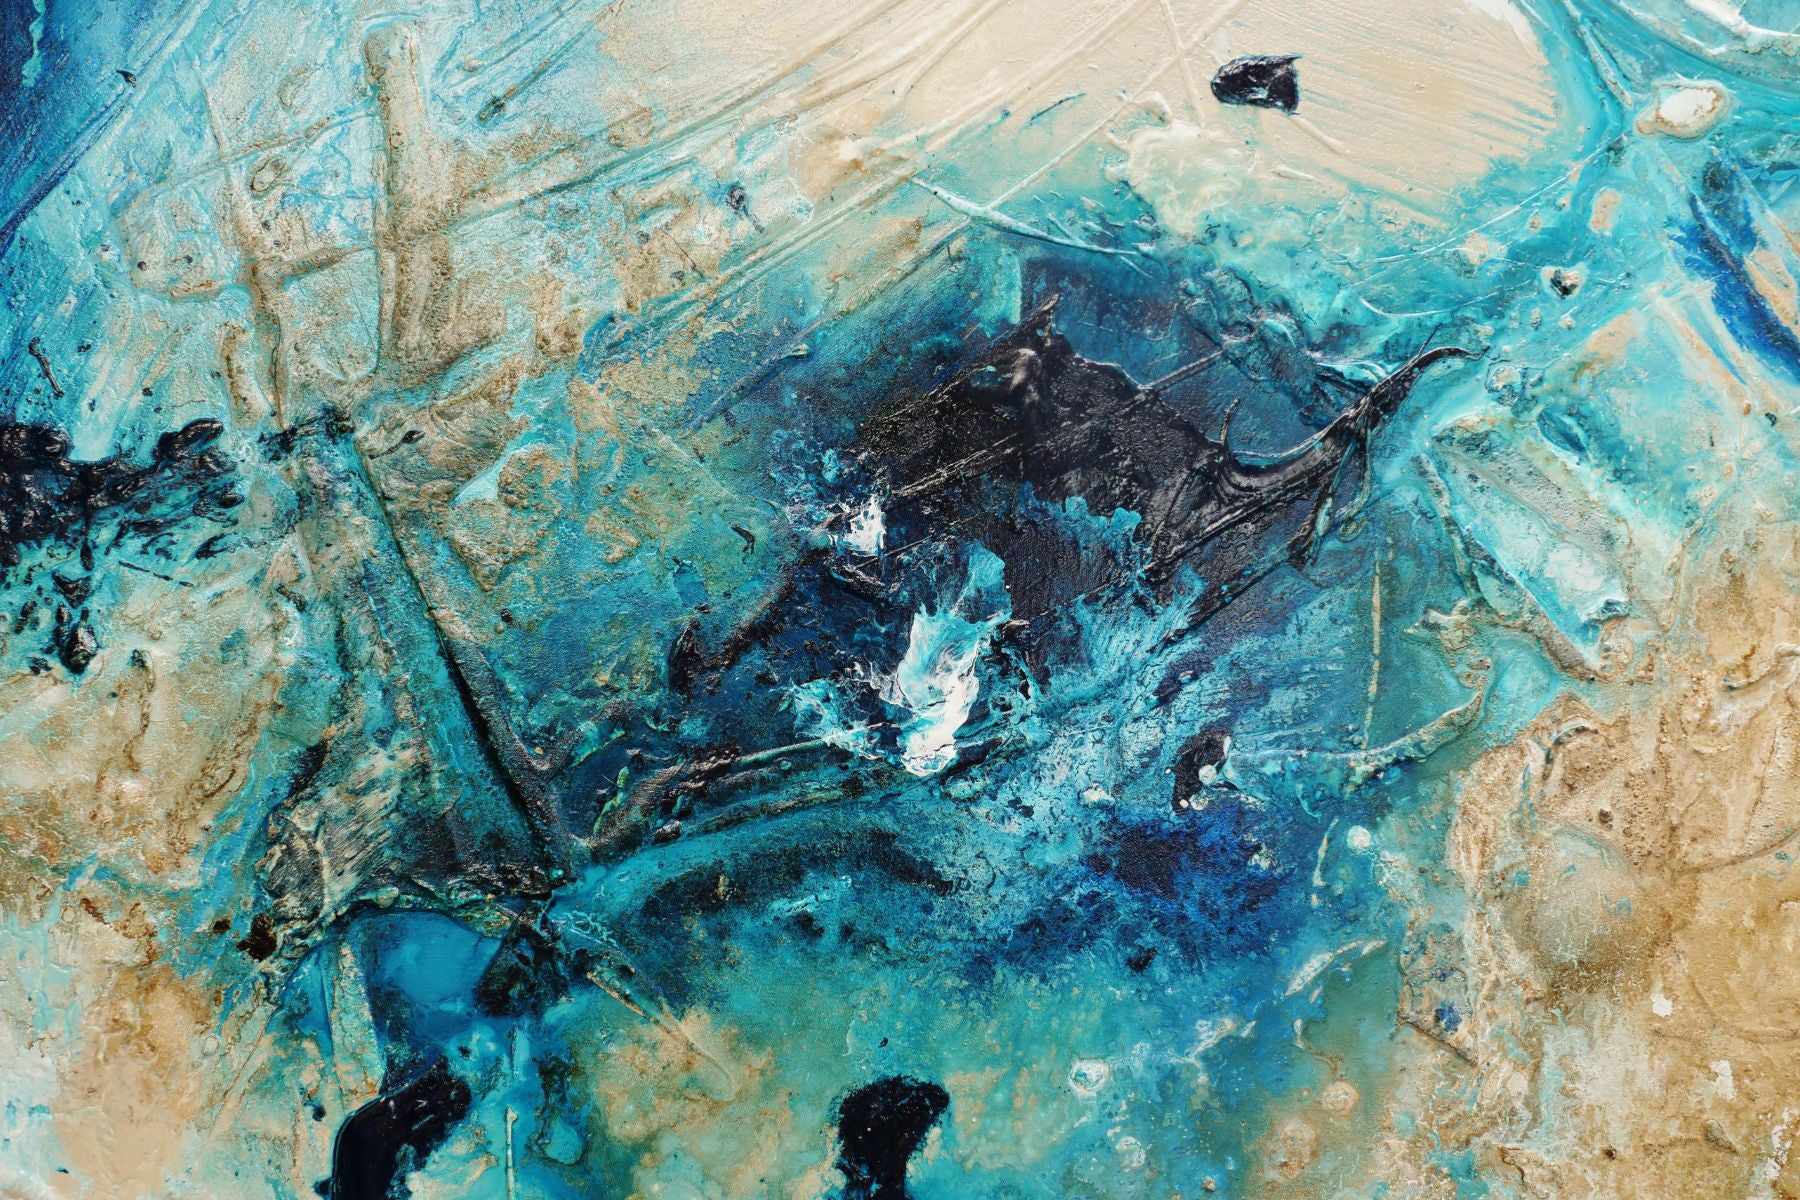 Oceans 240cm x 100cm Teal Cream Textured Abstract Painting (SOLD)